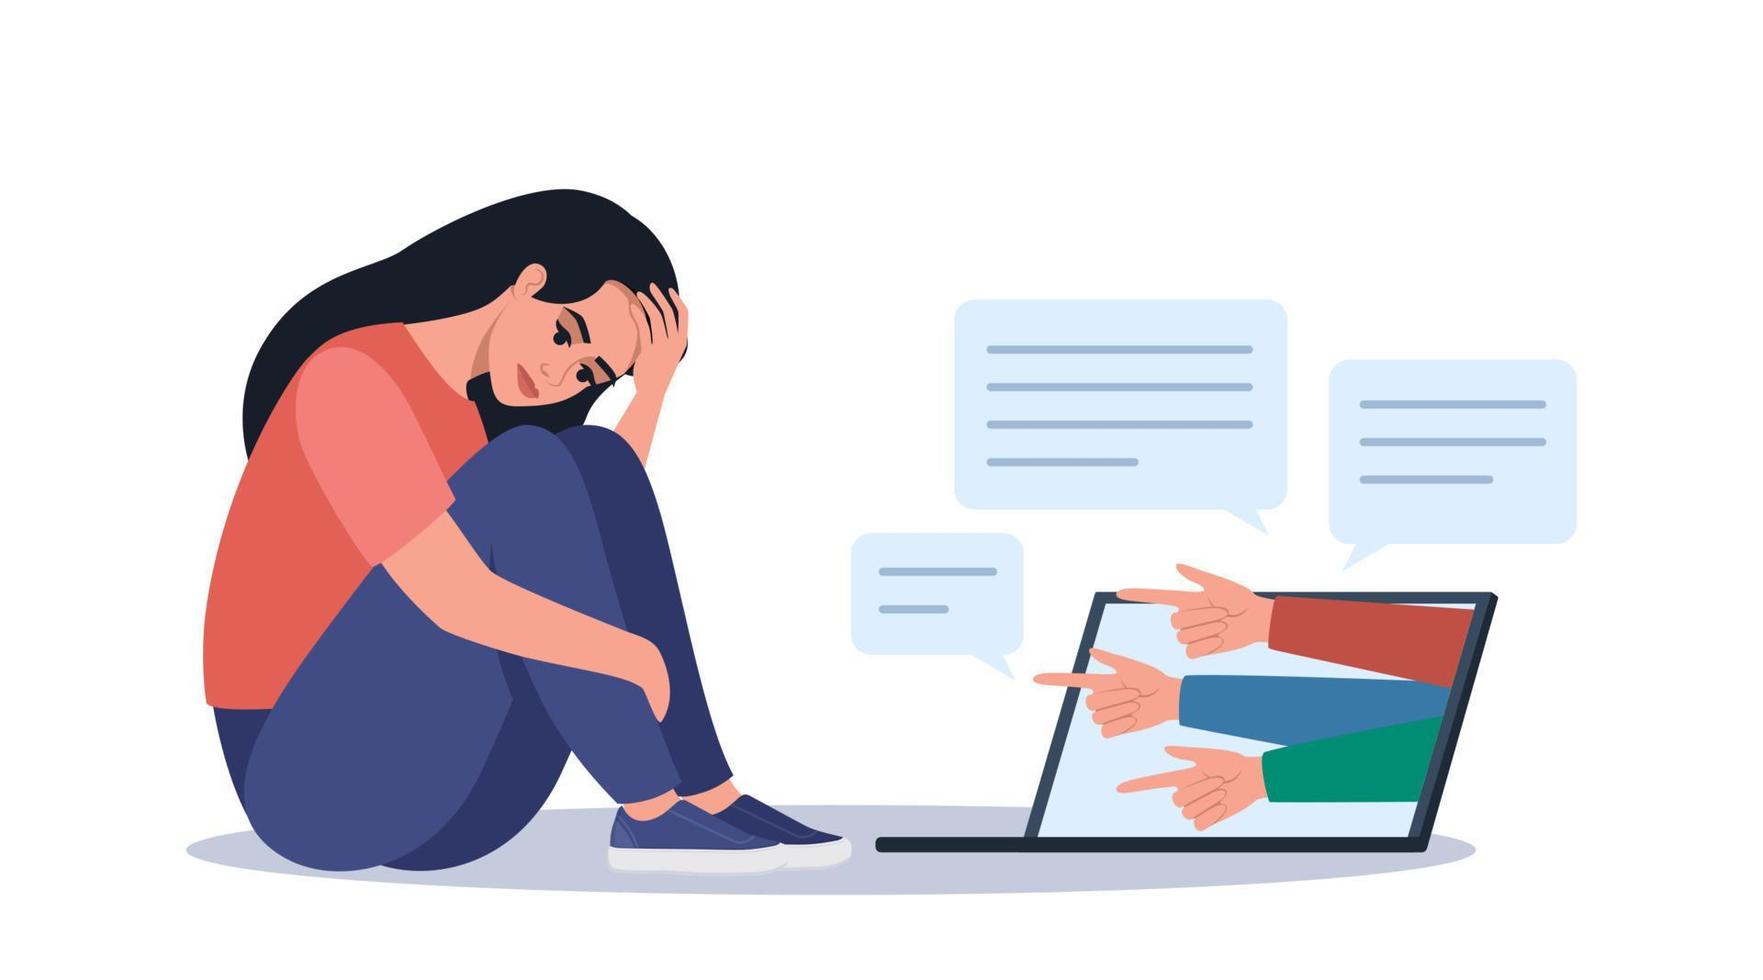 Cyber bullying. Depressed woman sitting on the floor, hands with index fingers pointing at her. Opinion and the pressure of society. Shame. Vector illustration.